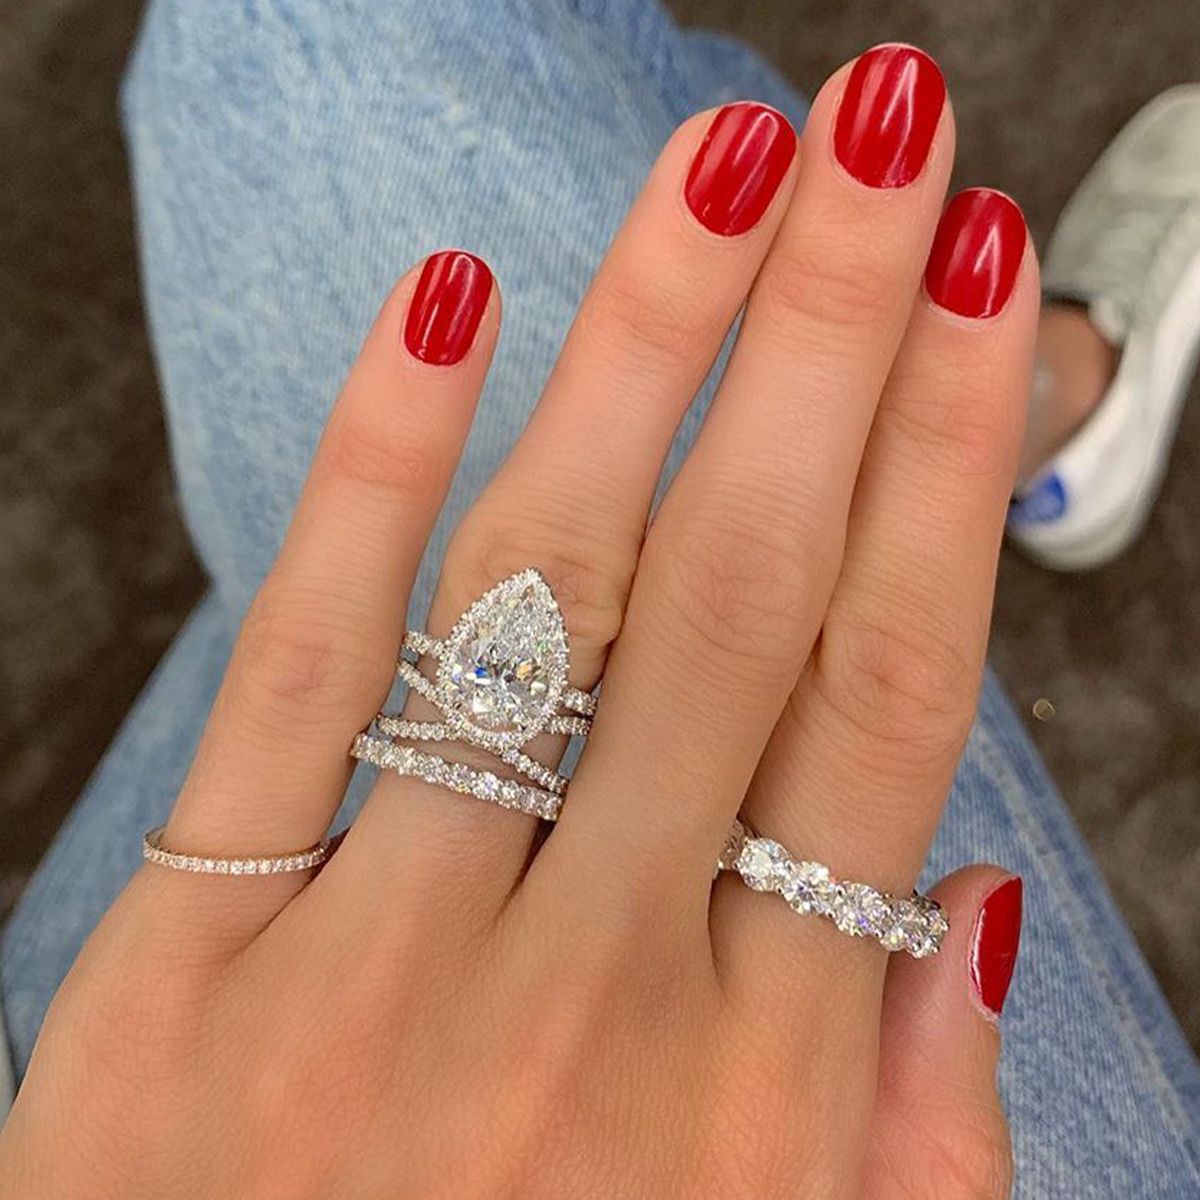 Large Diamond Rings: How to Buy Big Engagement Rings I VRAI